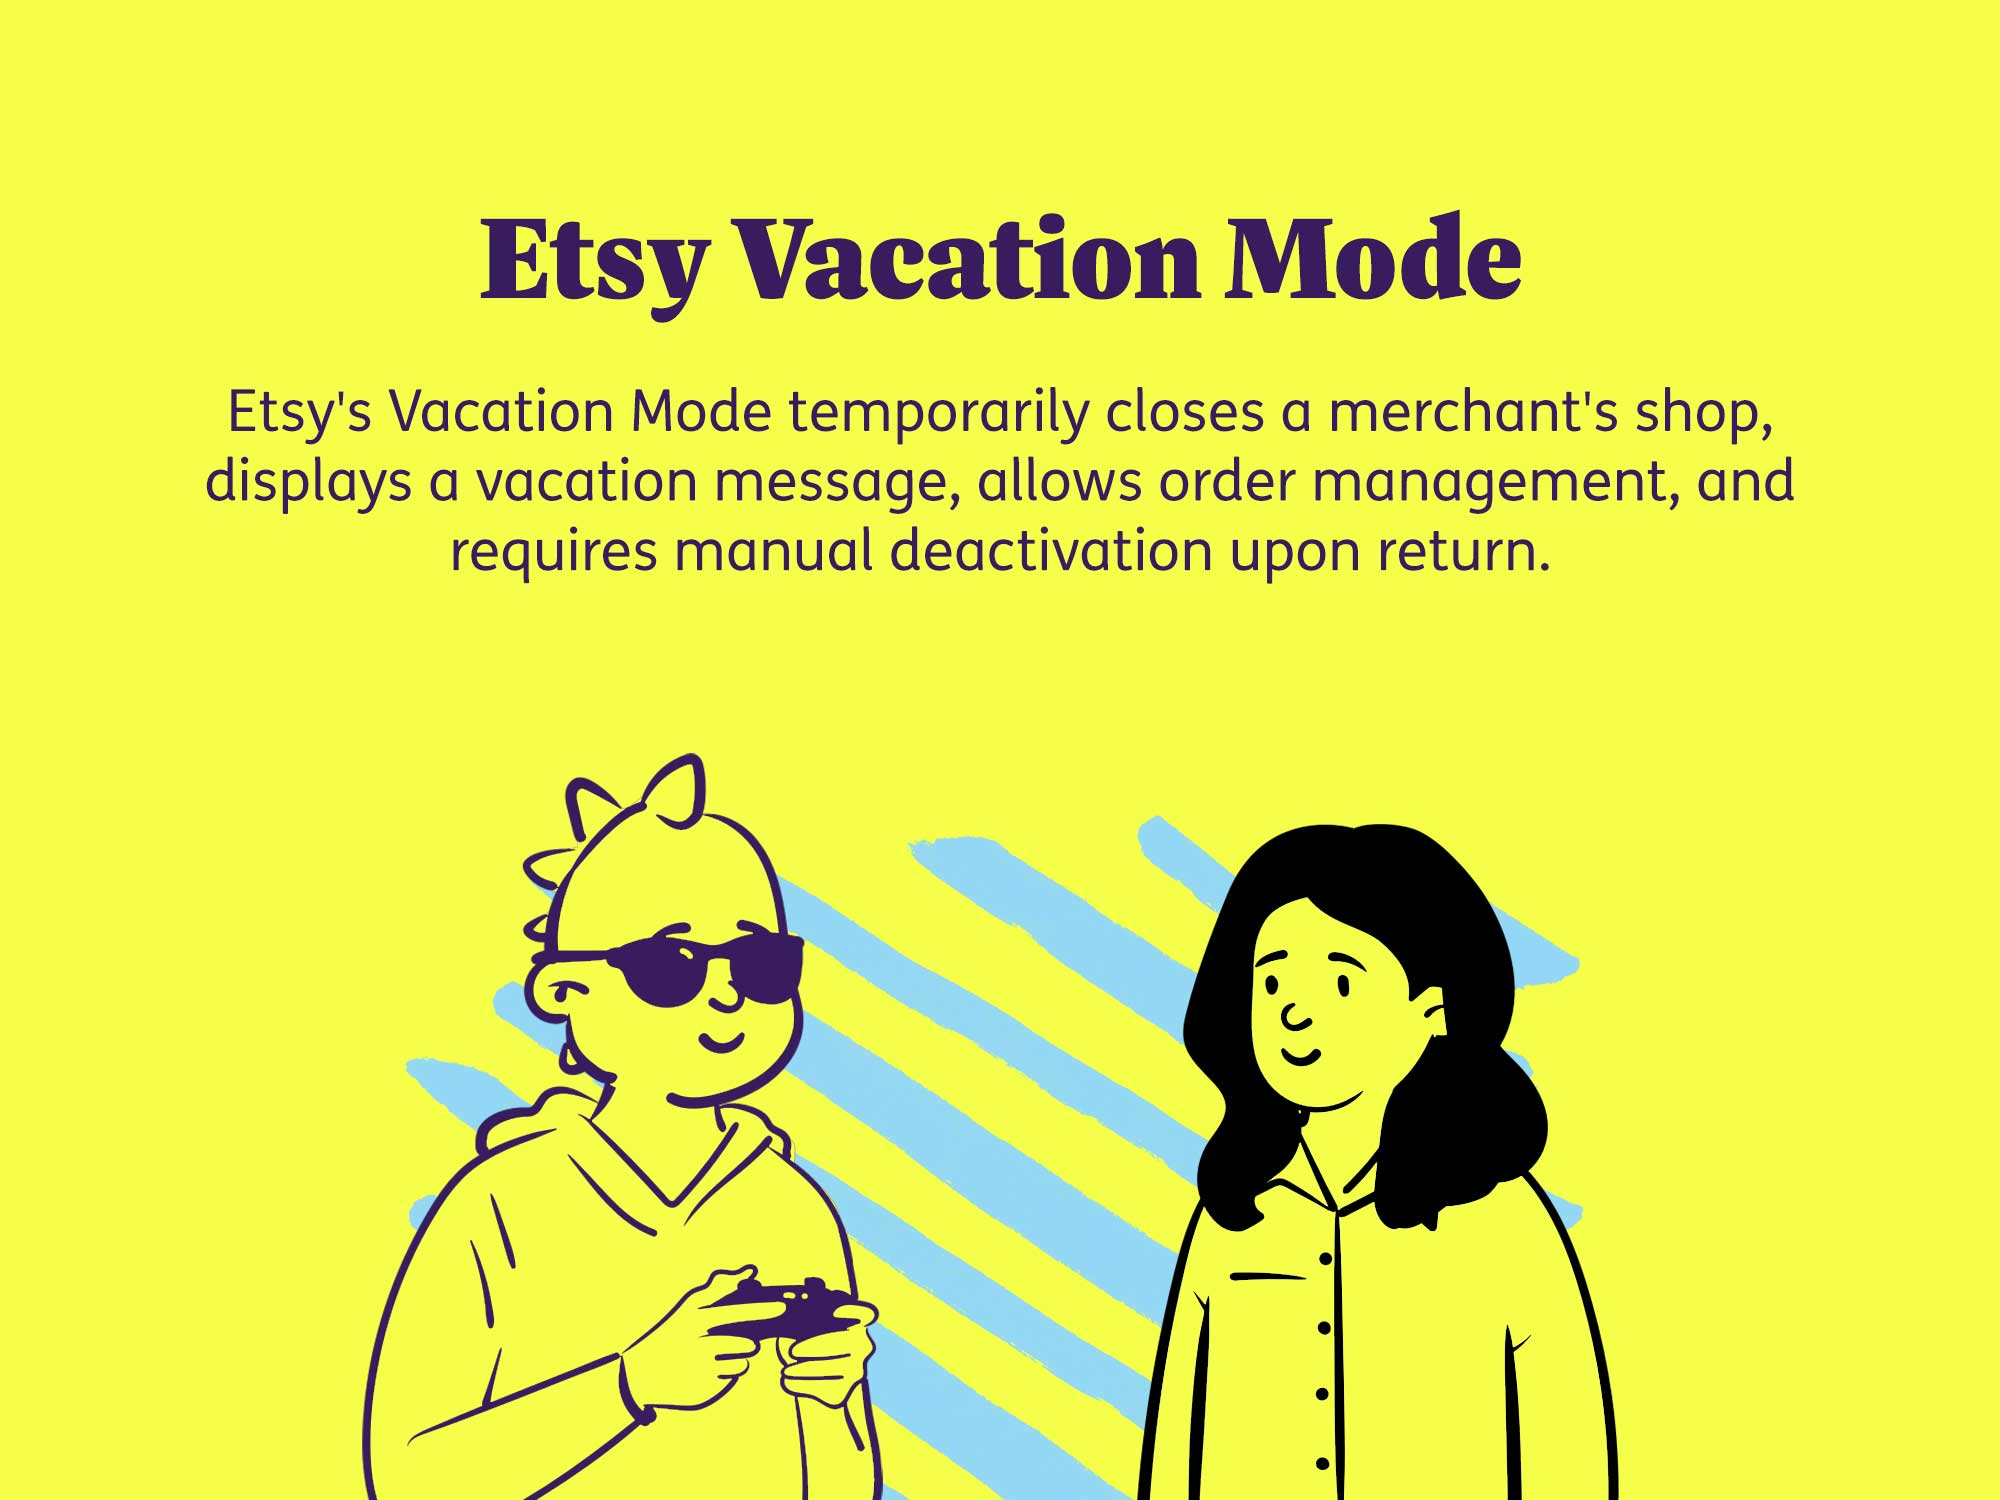 Etsy's Vacation Mode temporarily closes a merchant's shop, displays a vacation message, allows order management, and requires manual deactivation upon return.